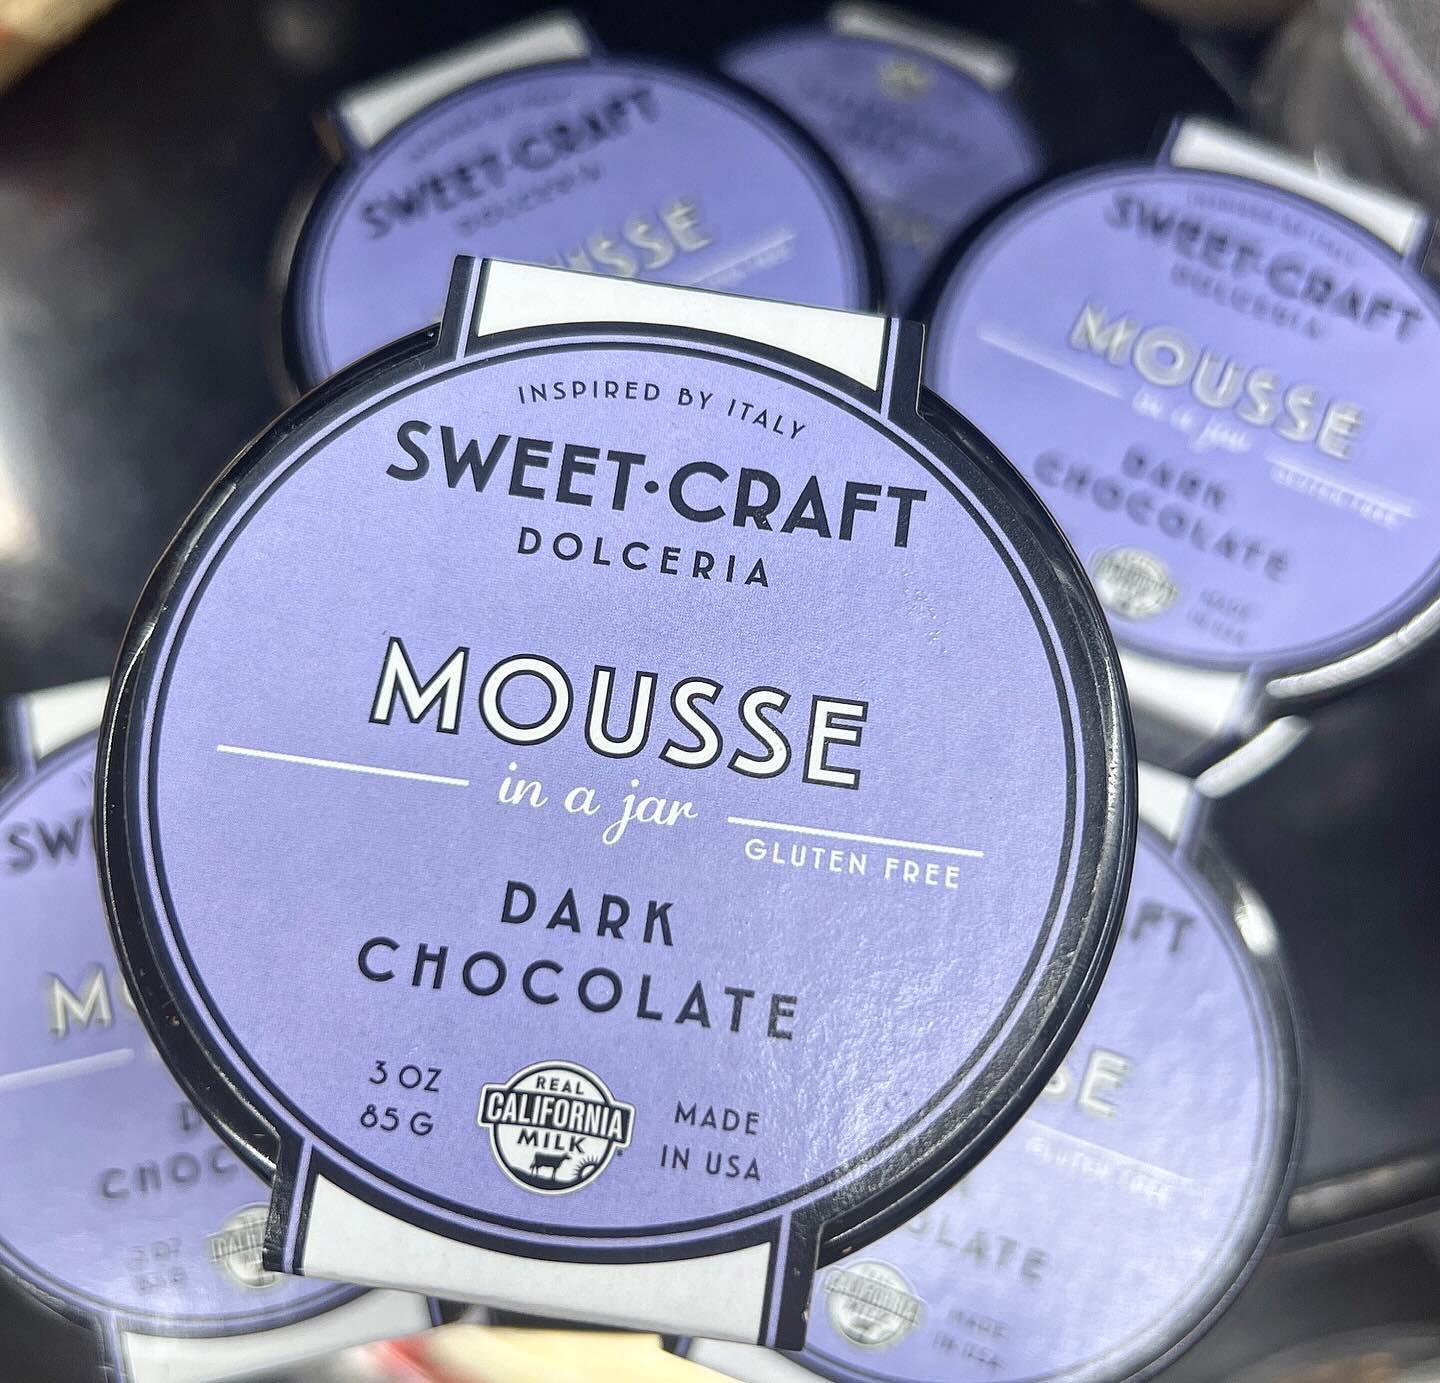 Stacks of Gluten Free decadence 💓 Our Dark Chocolate Mousse isn&rsquo;t for the faint of heart with its rich deep chocolate flavor so go on, treat yourself in preparation for the week ahead!

#SweetCraftDolceria #Chocolate #DessertsInAJar